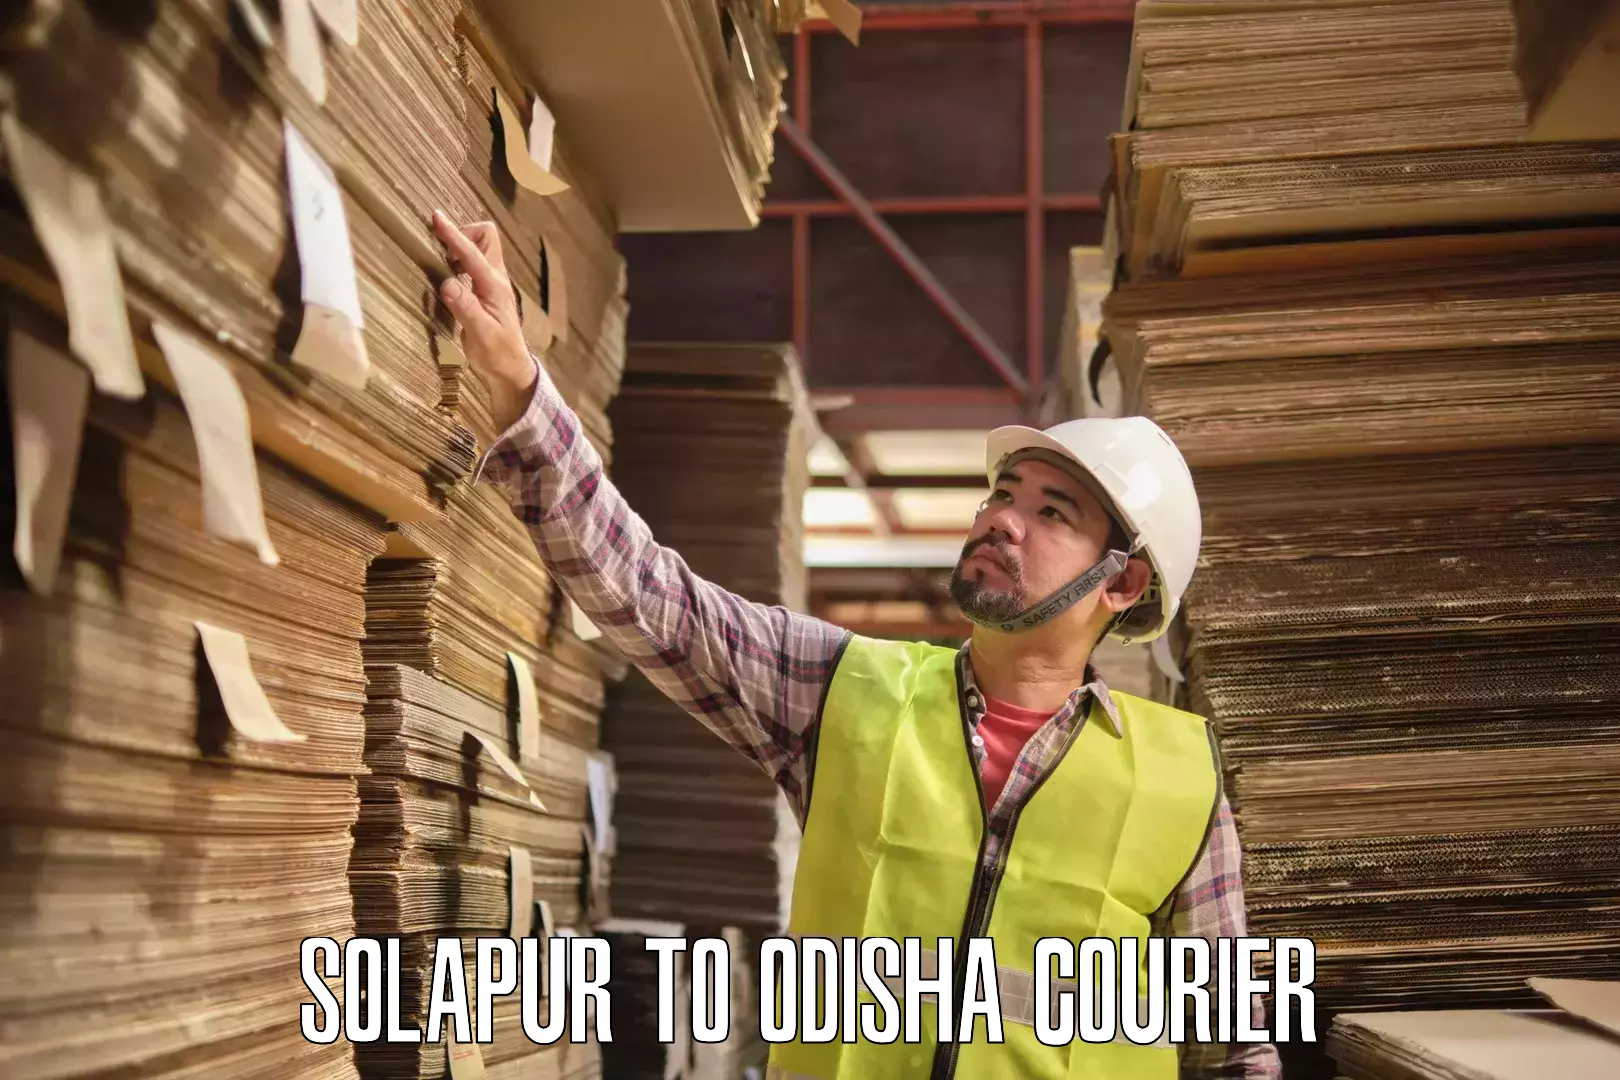 Professional courier handling Solapur to Chikiti